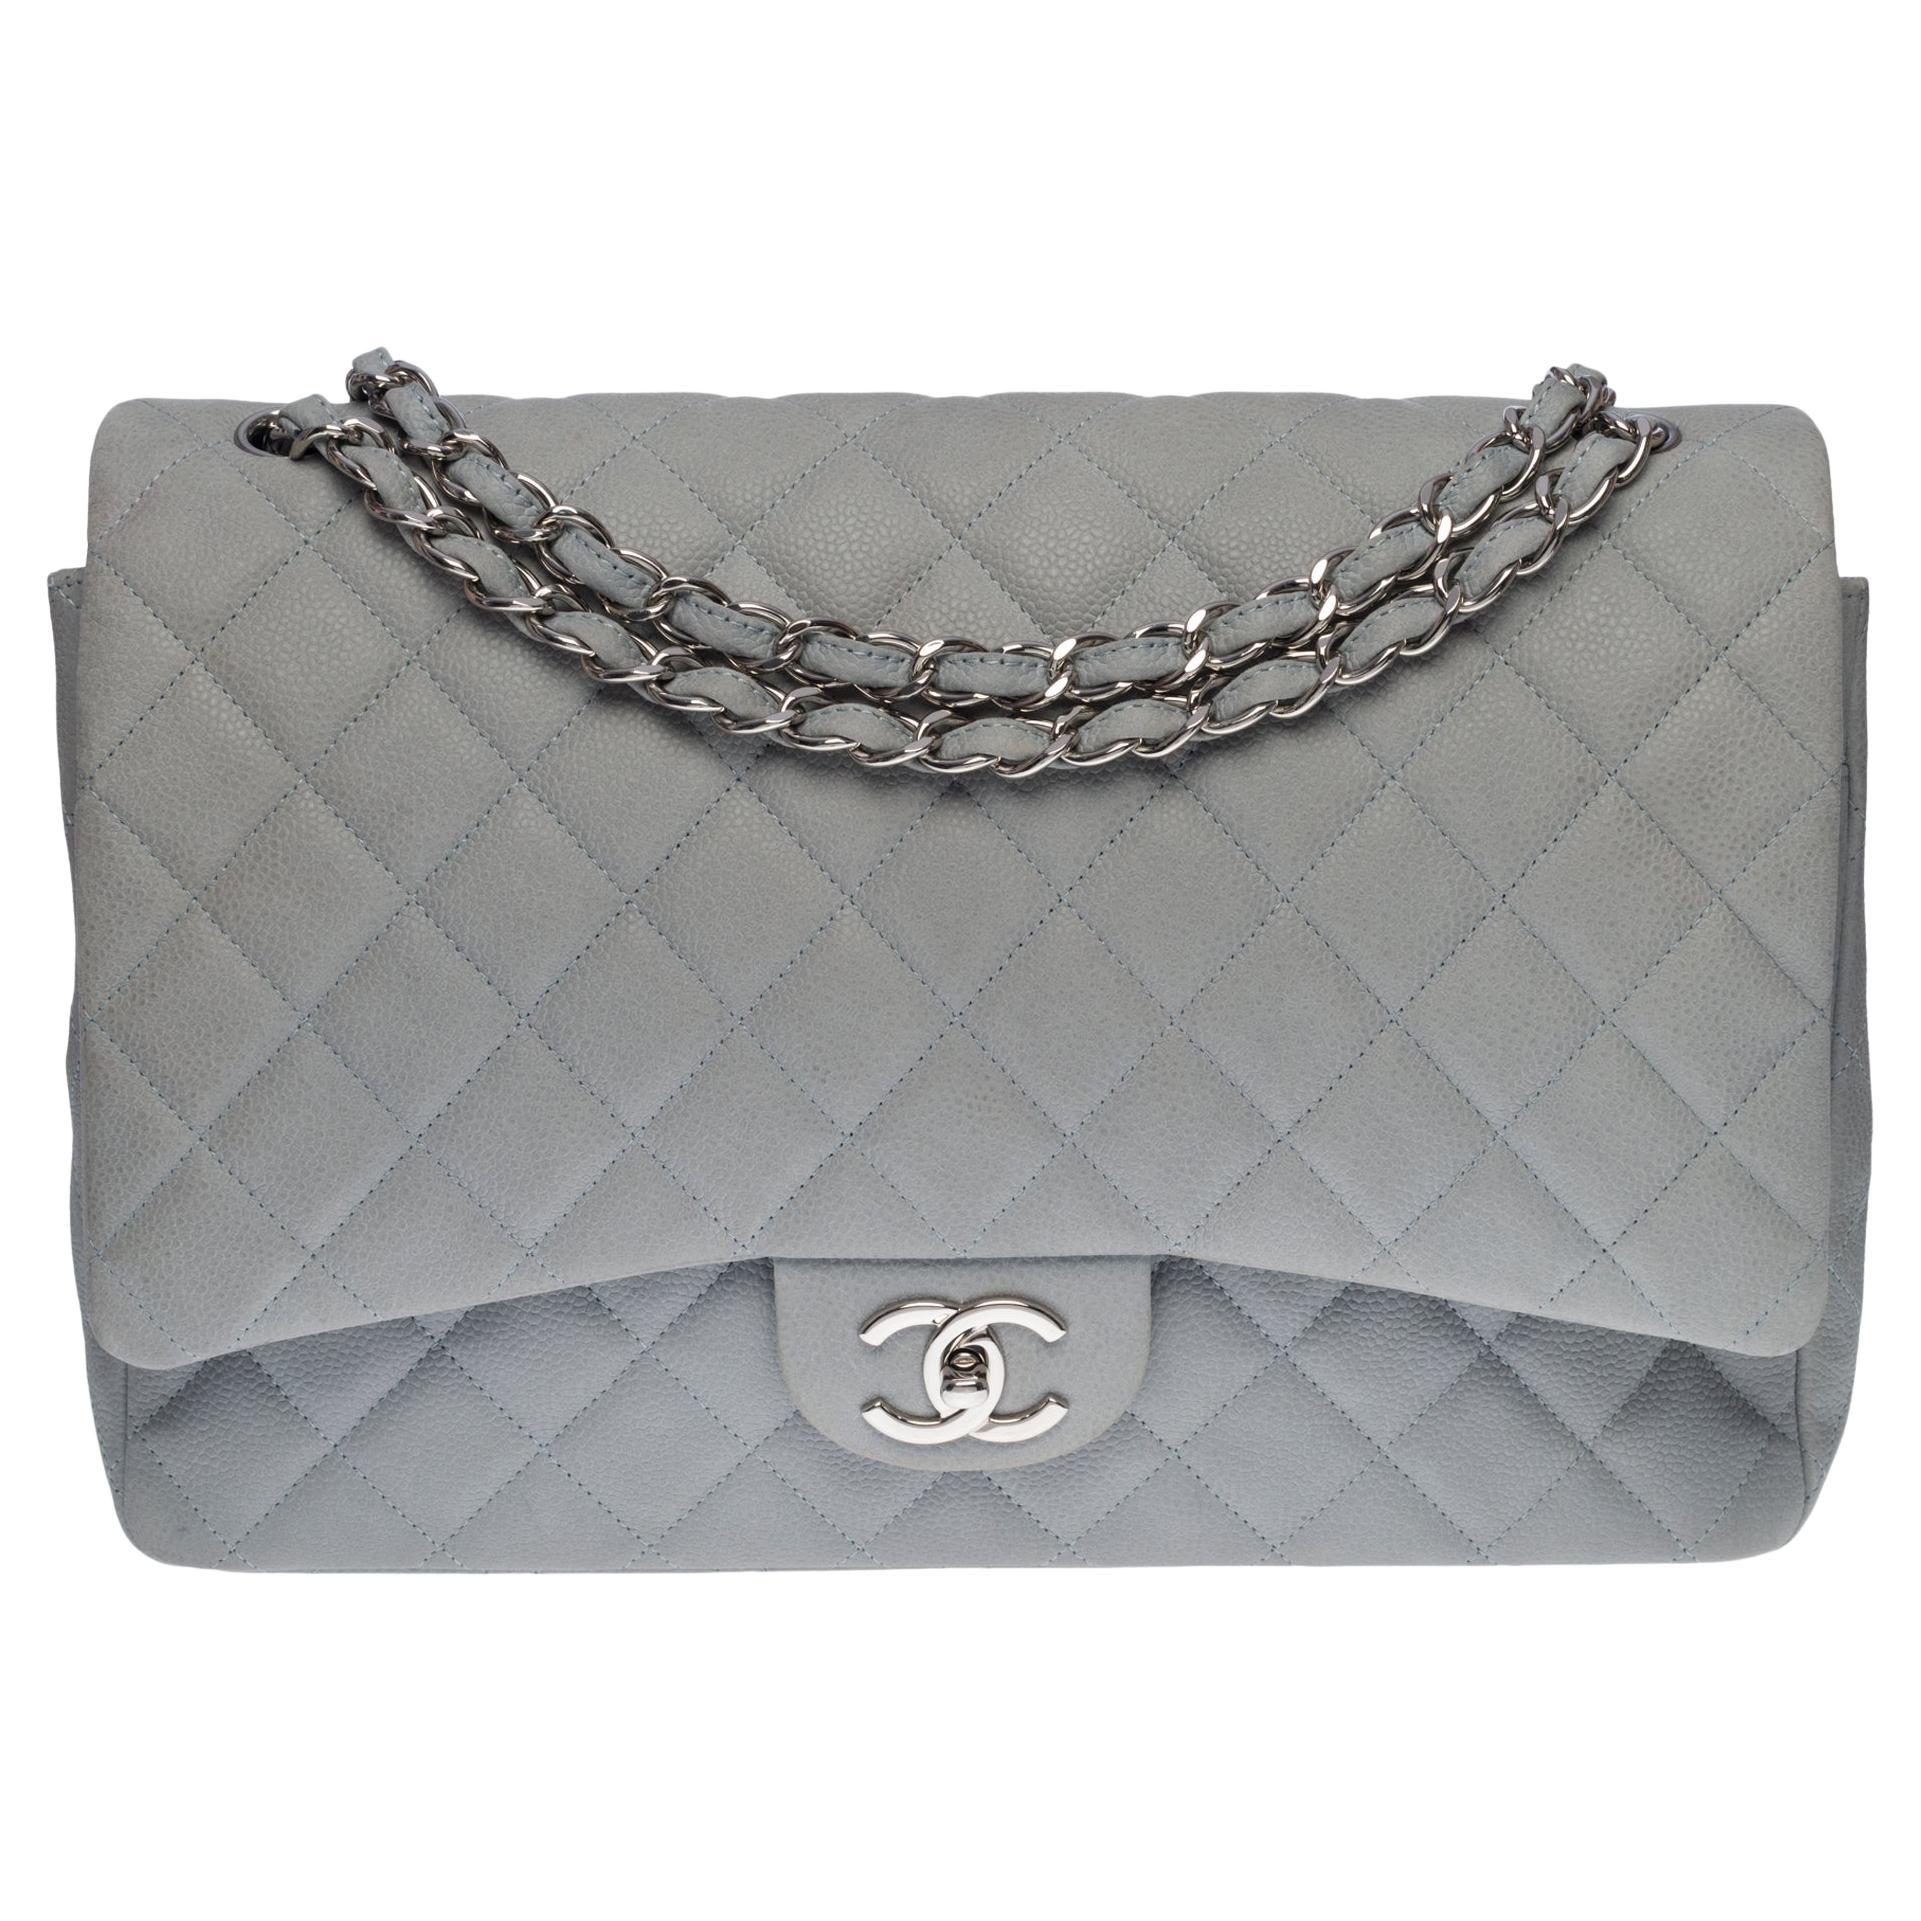 Chanel Timeless Maxi Jumbo shoulder bag in grey quilted caviar leather, SHW